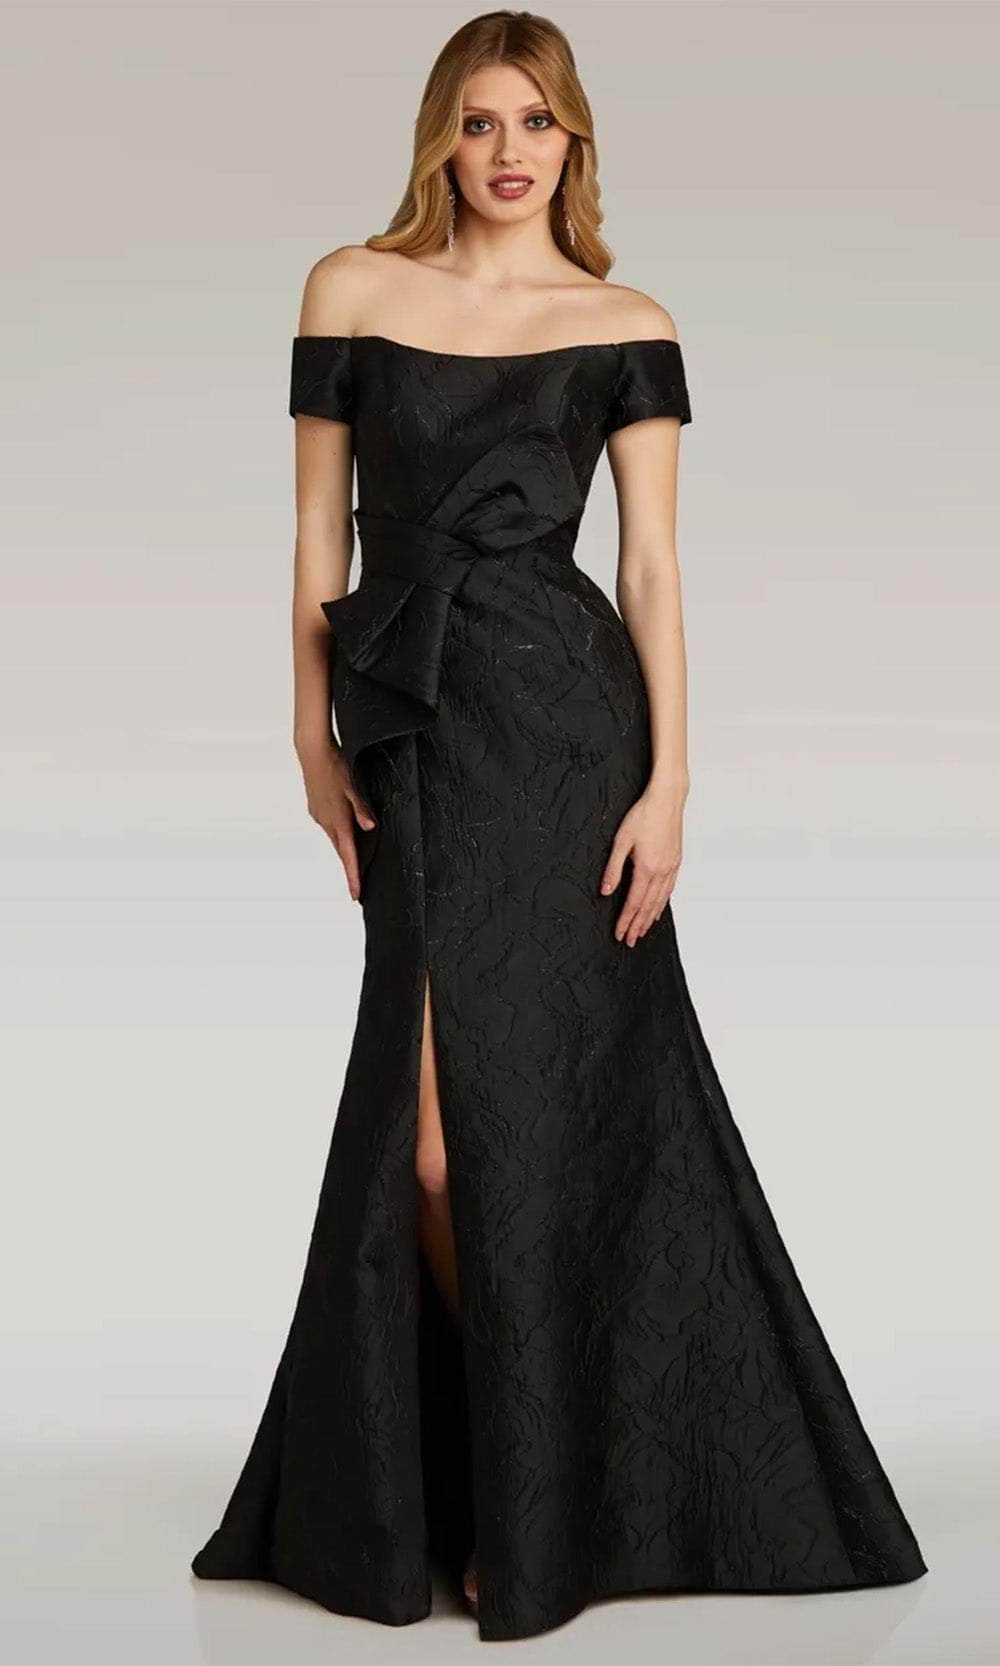 Image of Gia Franco 12301 - Bow Detailed Evening Dress